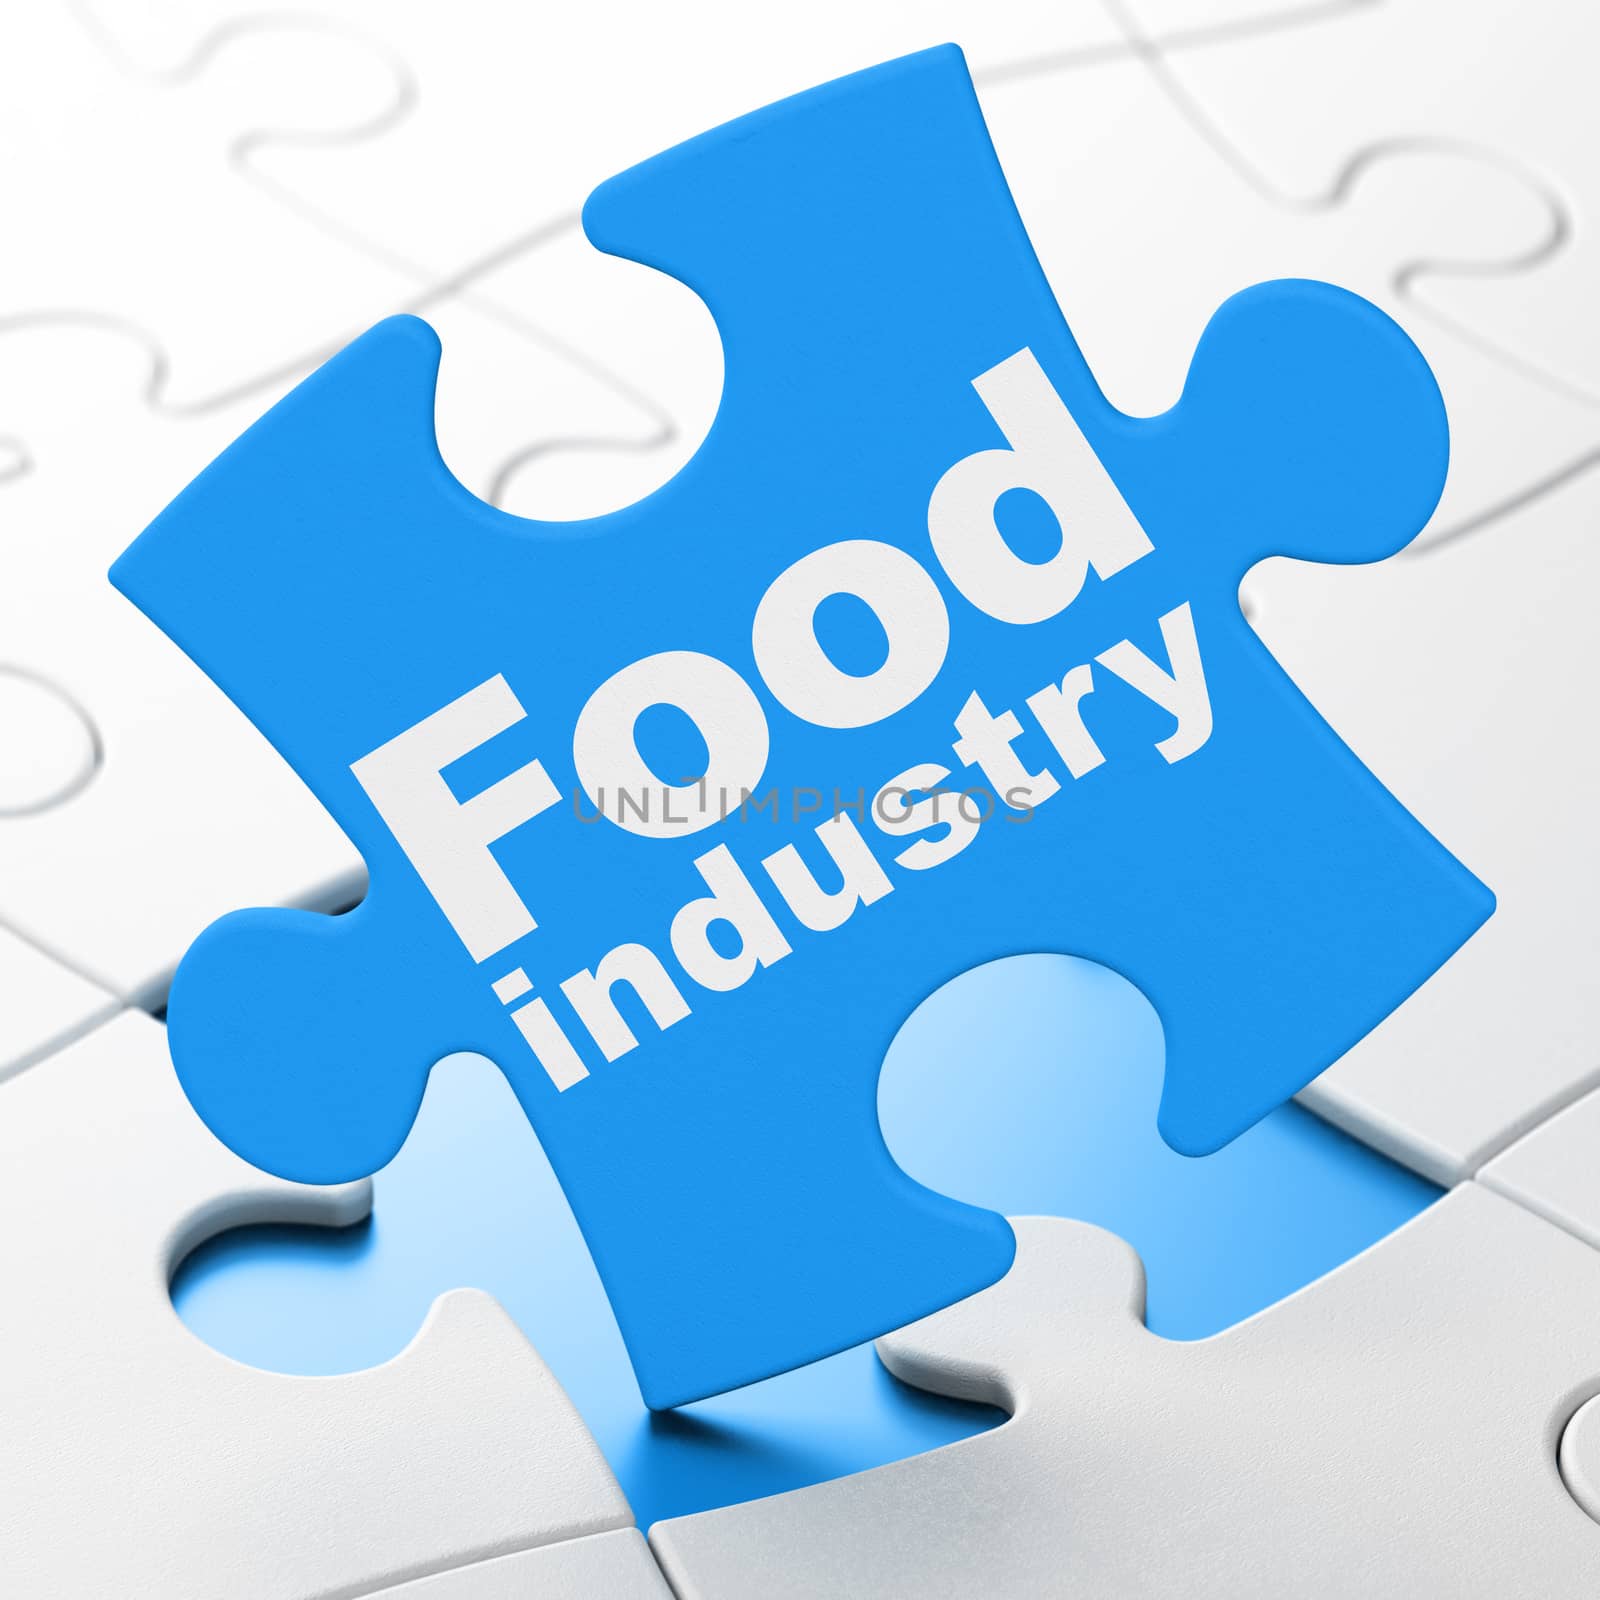 Industry concept: Food Industry on Blue puzzle pieces background, 3D rendering